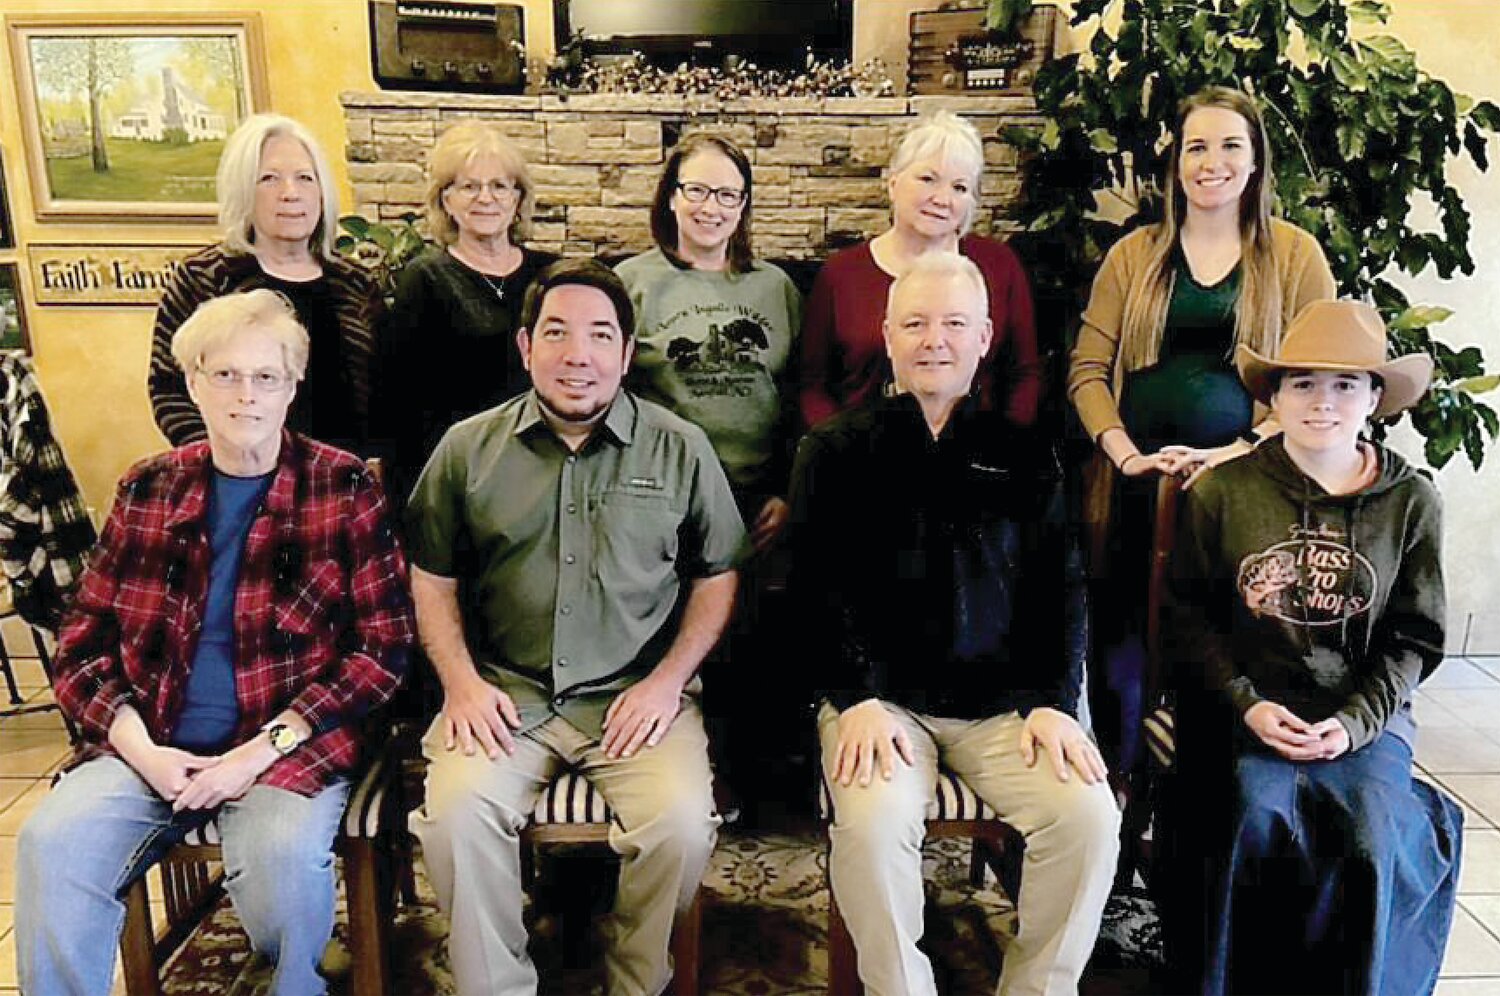 Wilder Day Committee 2023. Front row, from left: Debbie Ludwig, Nicholas Inman, Gene Loge and Sheena Mahan. Back row: Susie Choate, Connie Roberts, Calleen Jones, Kim Miller and Brittany Miller. Committee members not present: Clint Jackson, Blake Miller and Sue Fuge.